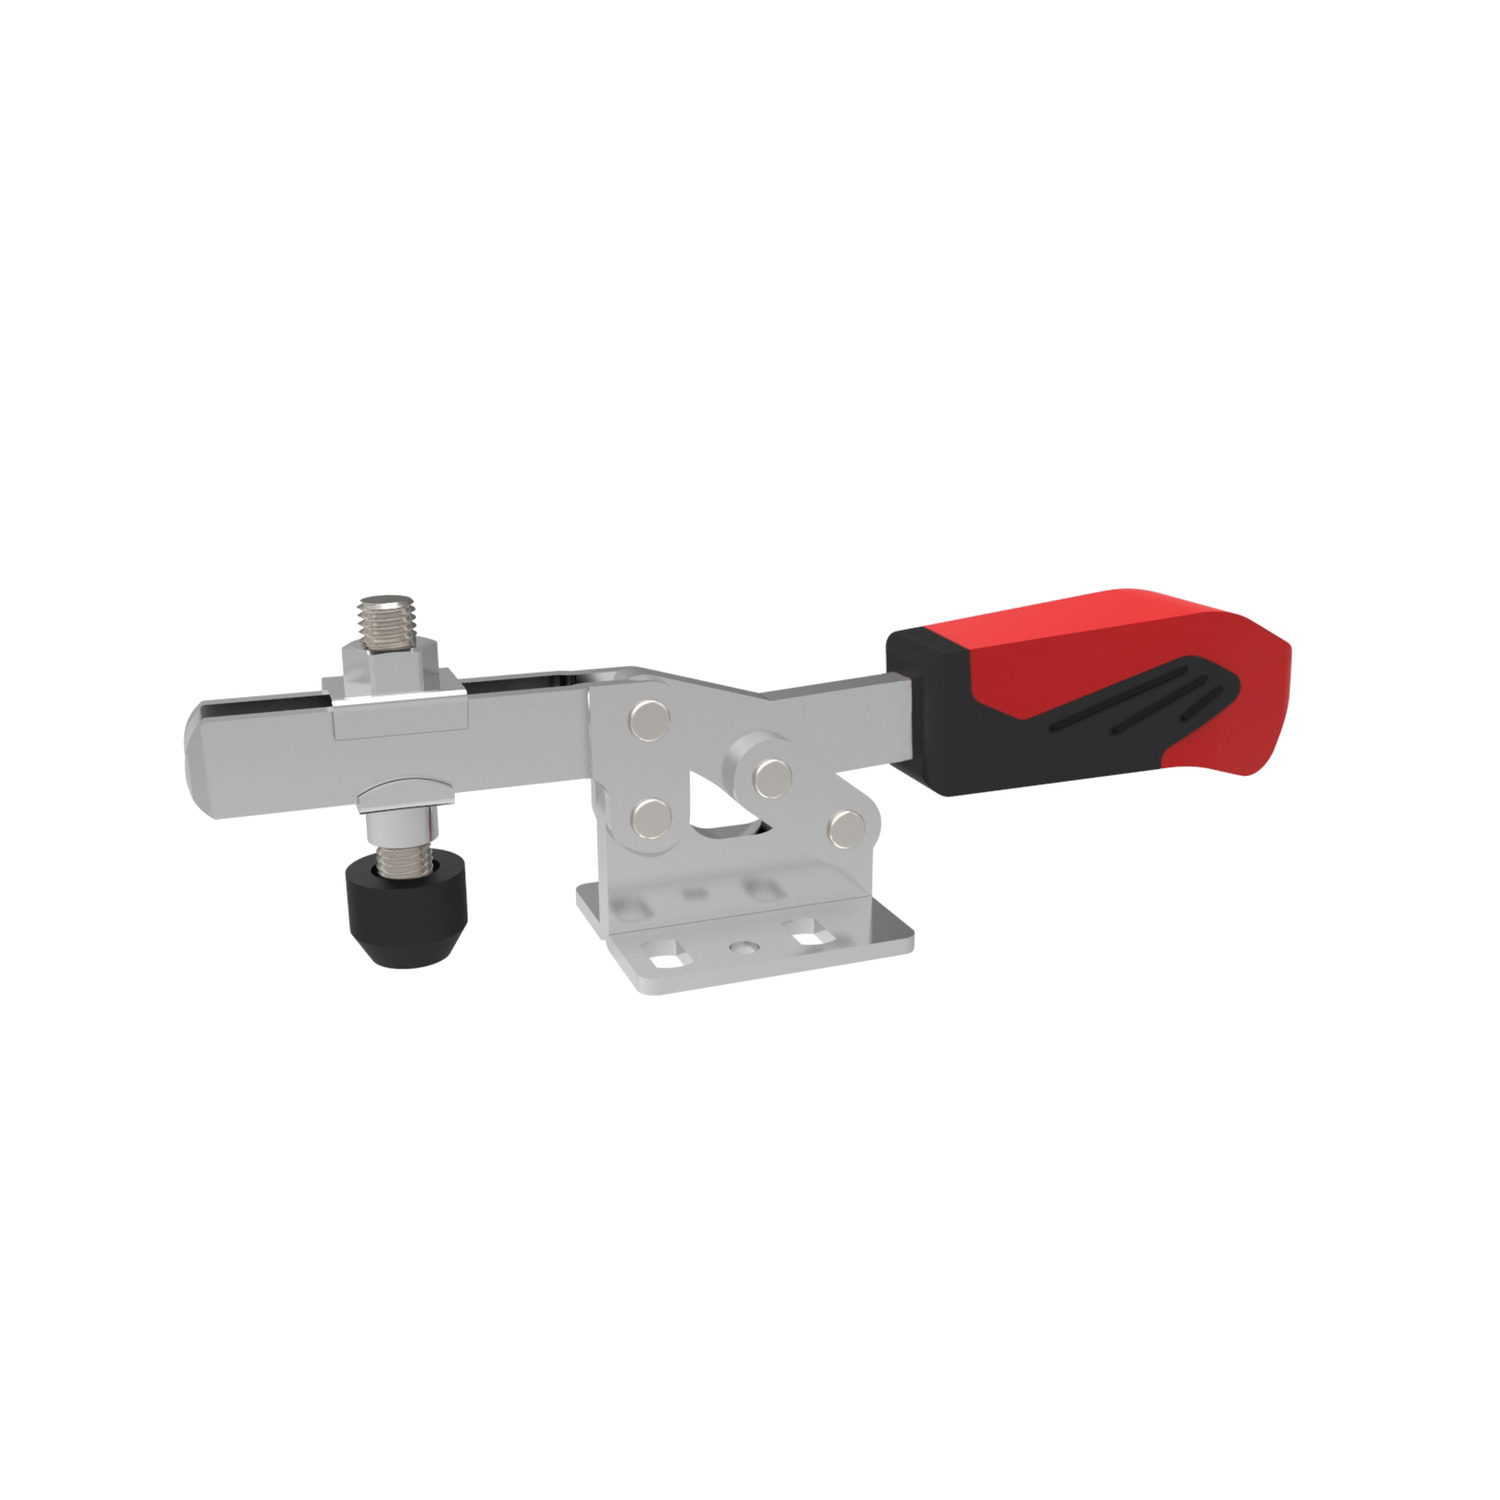 41000.1 - Horizontal Acting Toggle Clamps